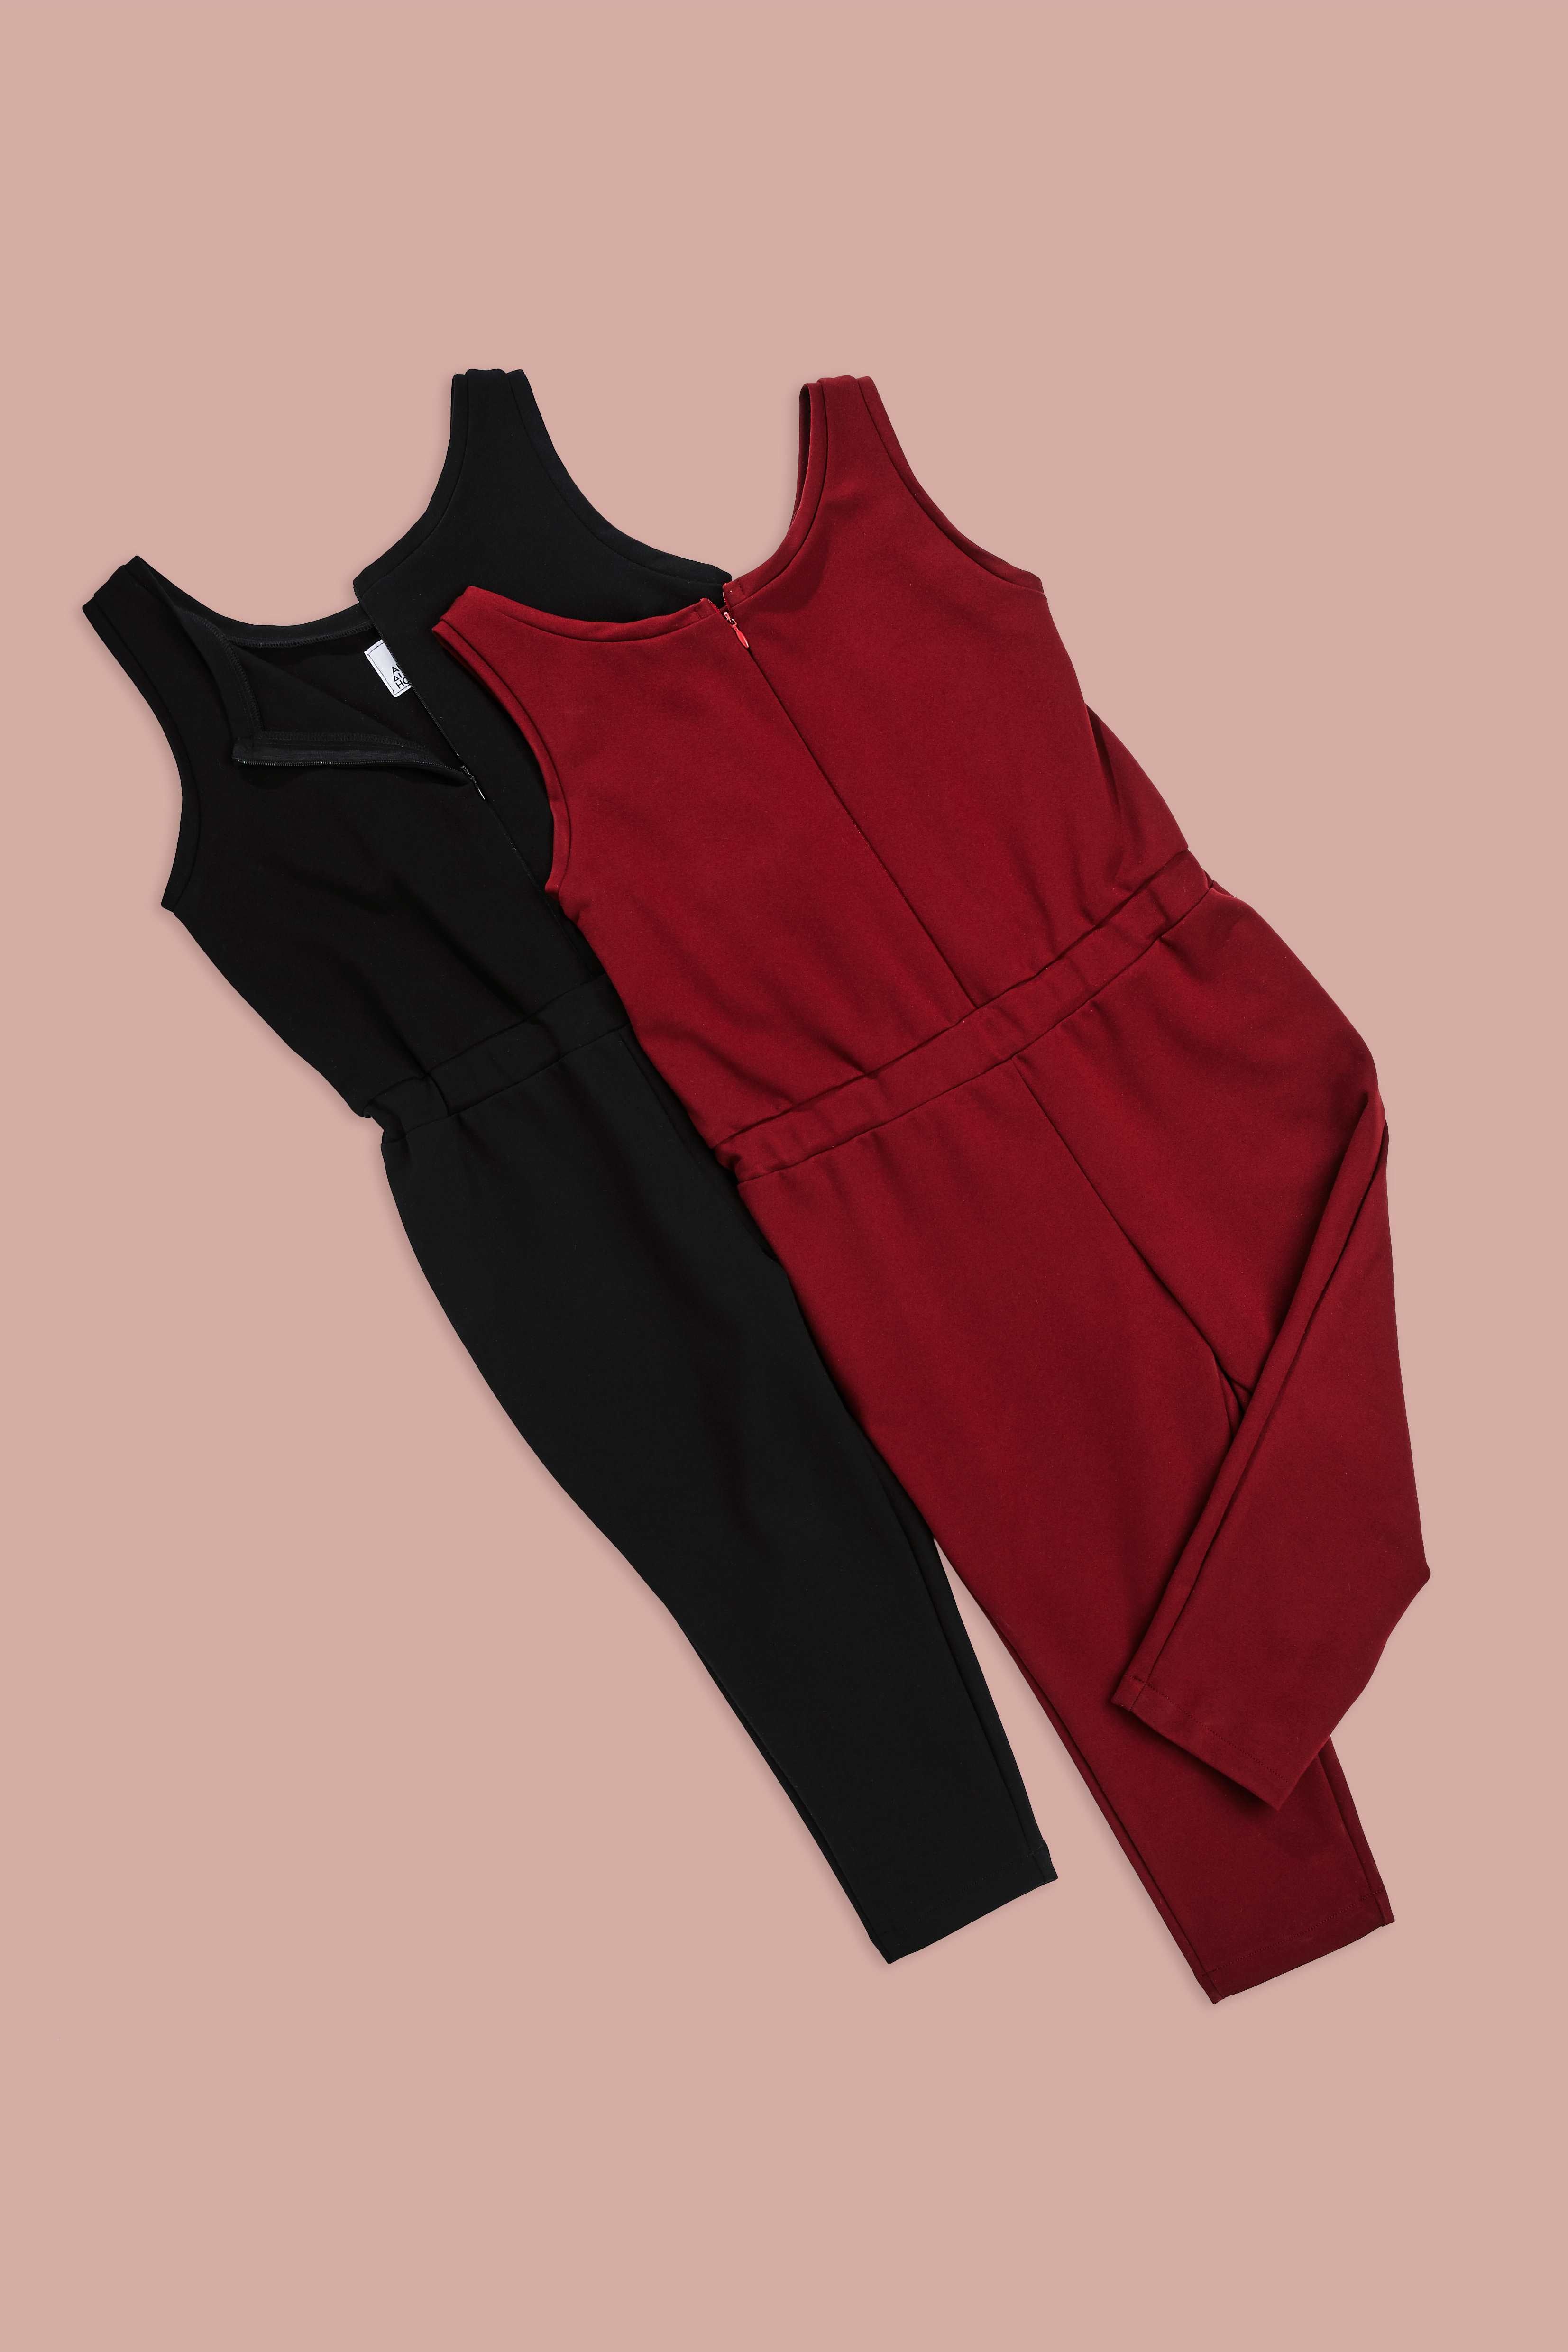 red and black jumpsuits for people with dwarfism on rose background